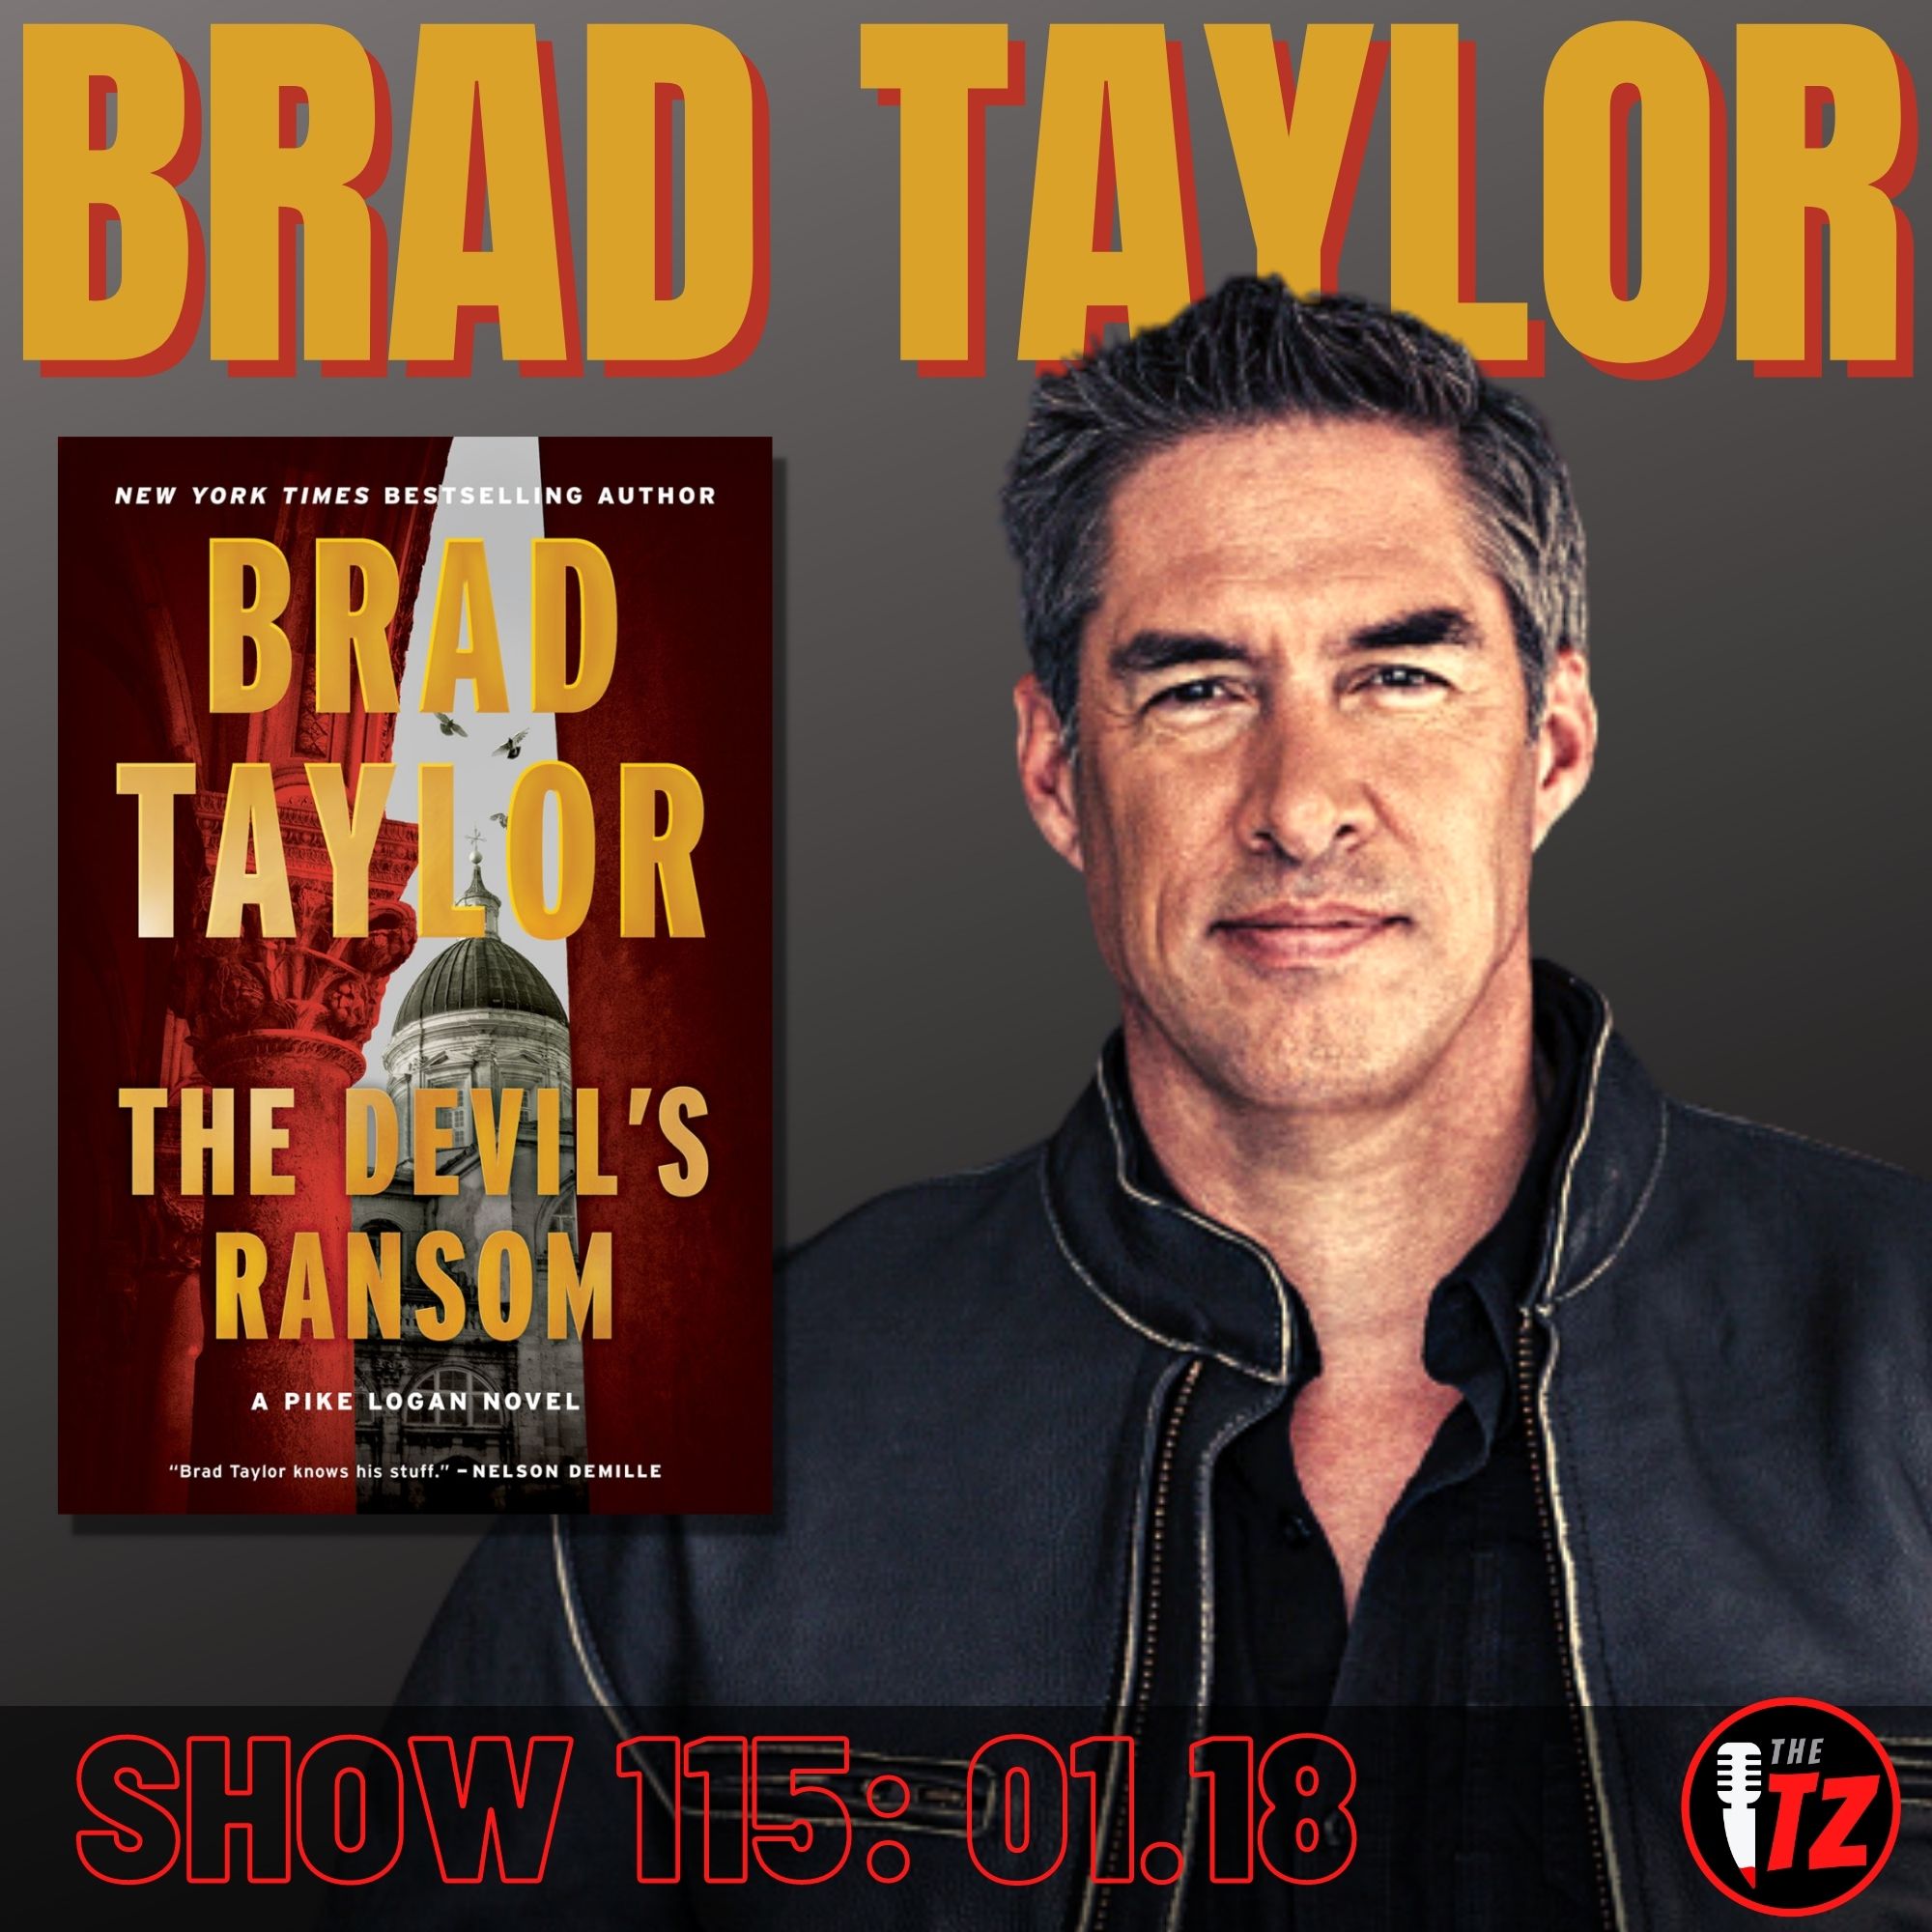 Brad Taylor, New York Times Bestselling Author with The Devil's Ransom